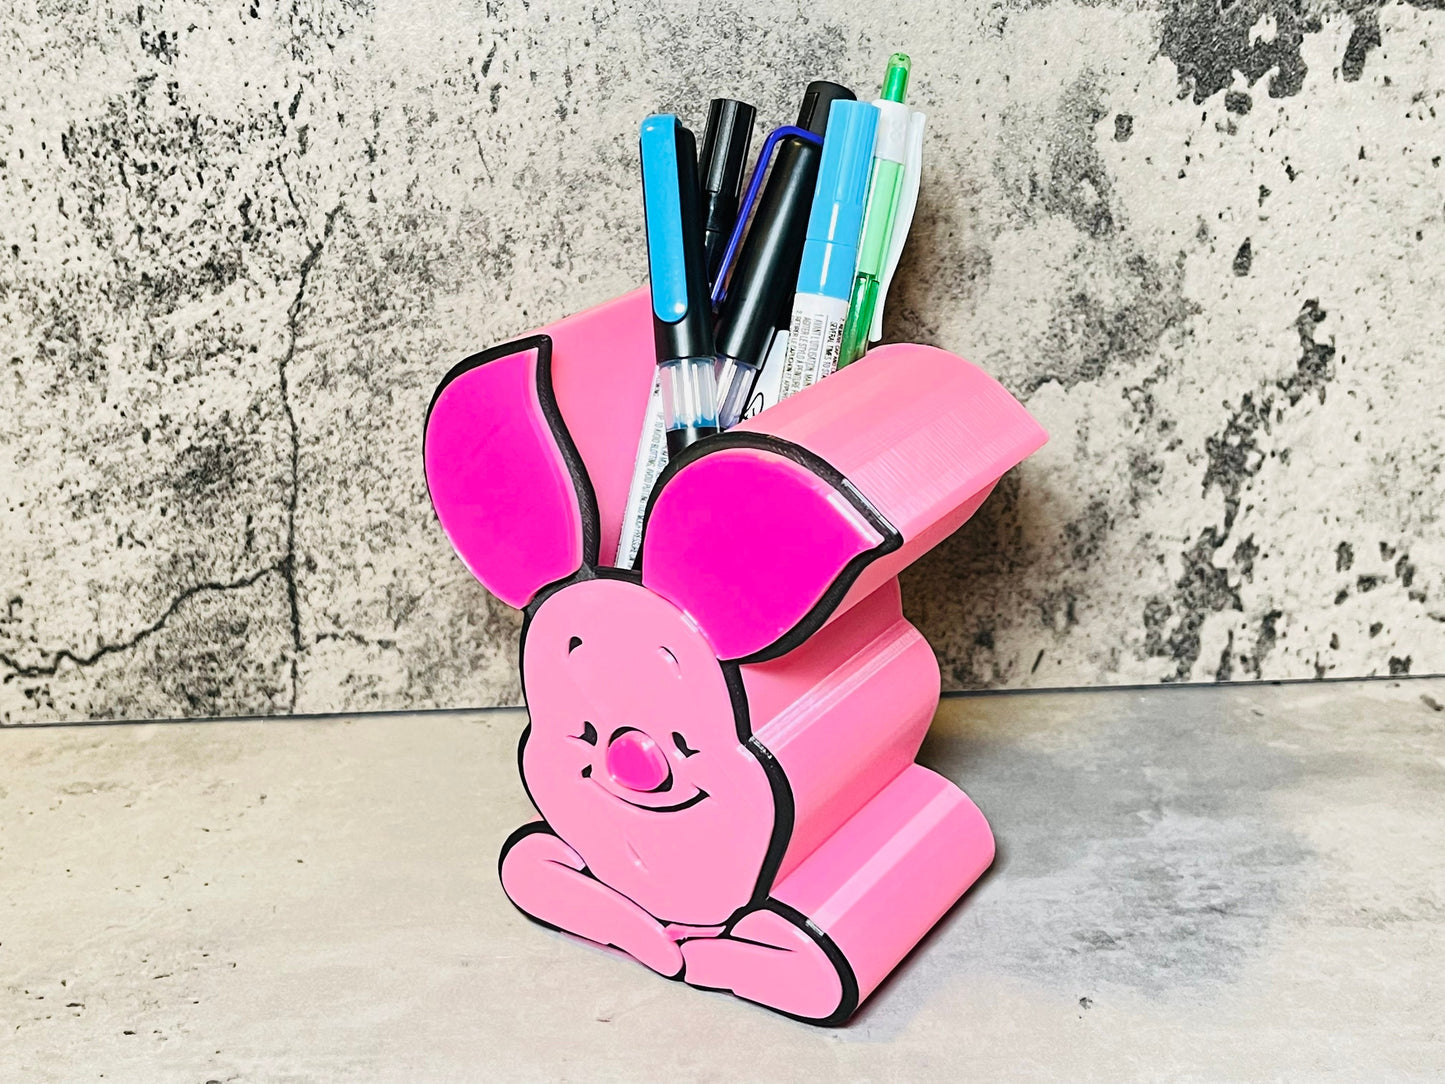 Winnie the Pooh Honey Pot Pencil Holder by Peter